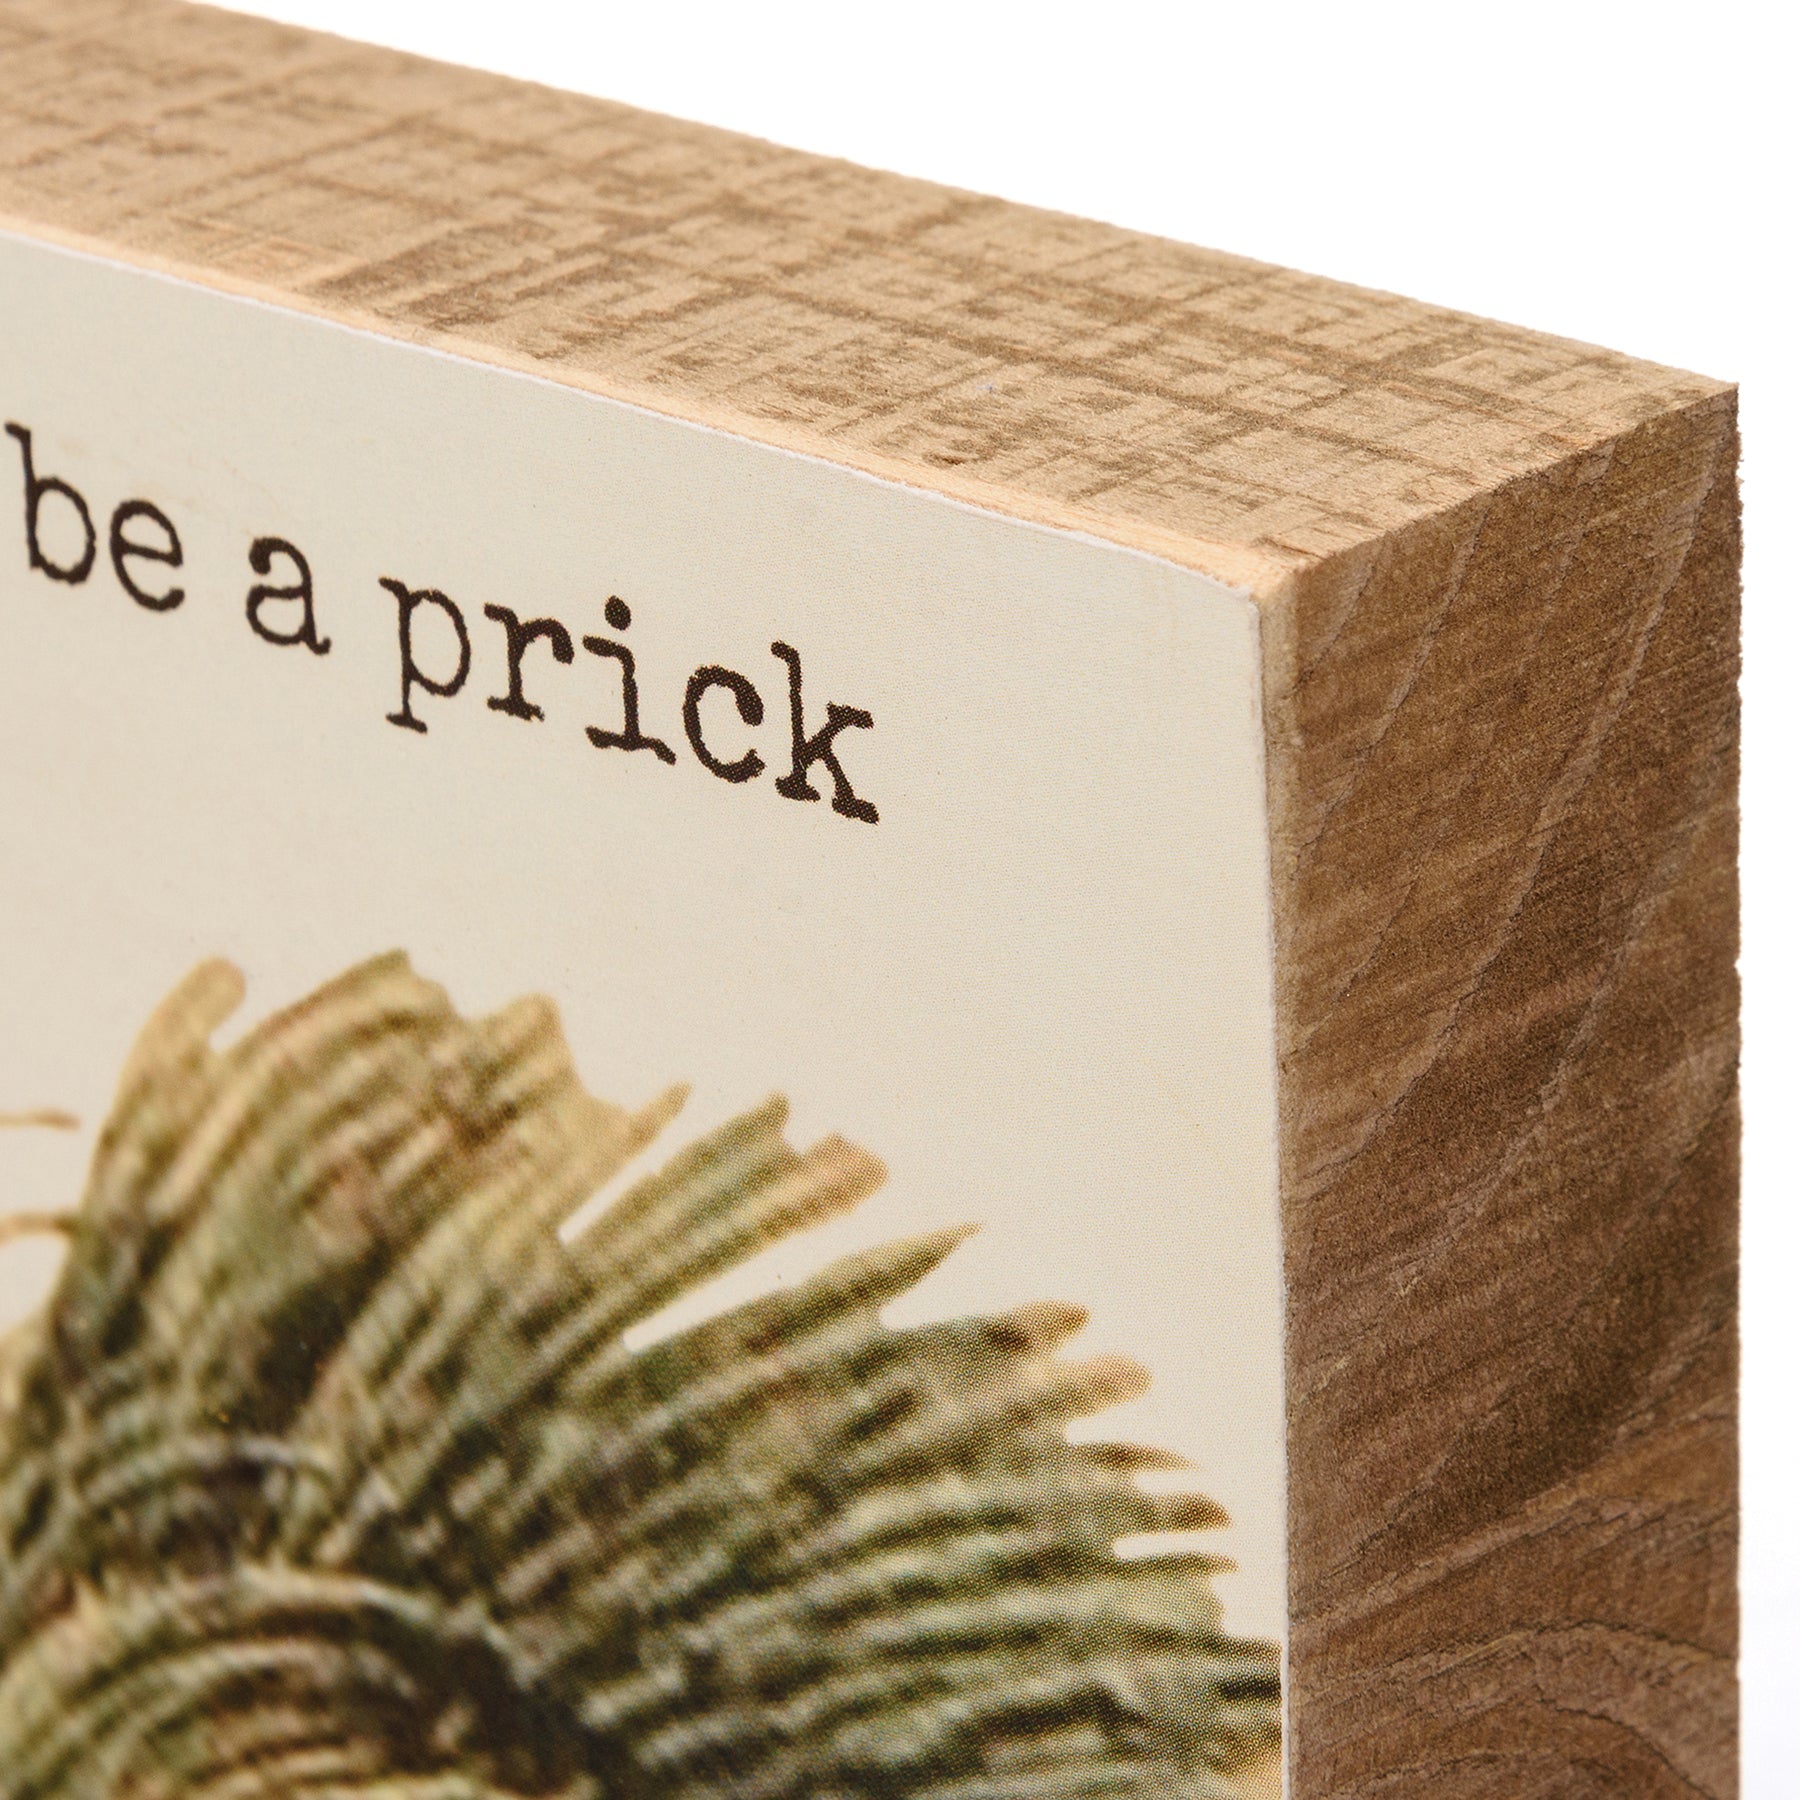 Don't Be A Prick Wooden Block Sign | Porcupine